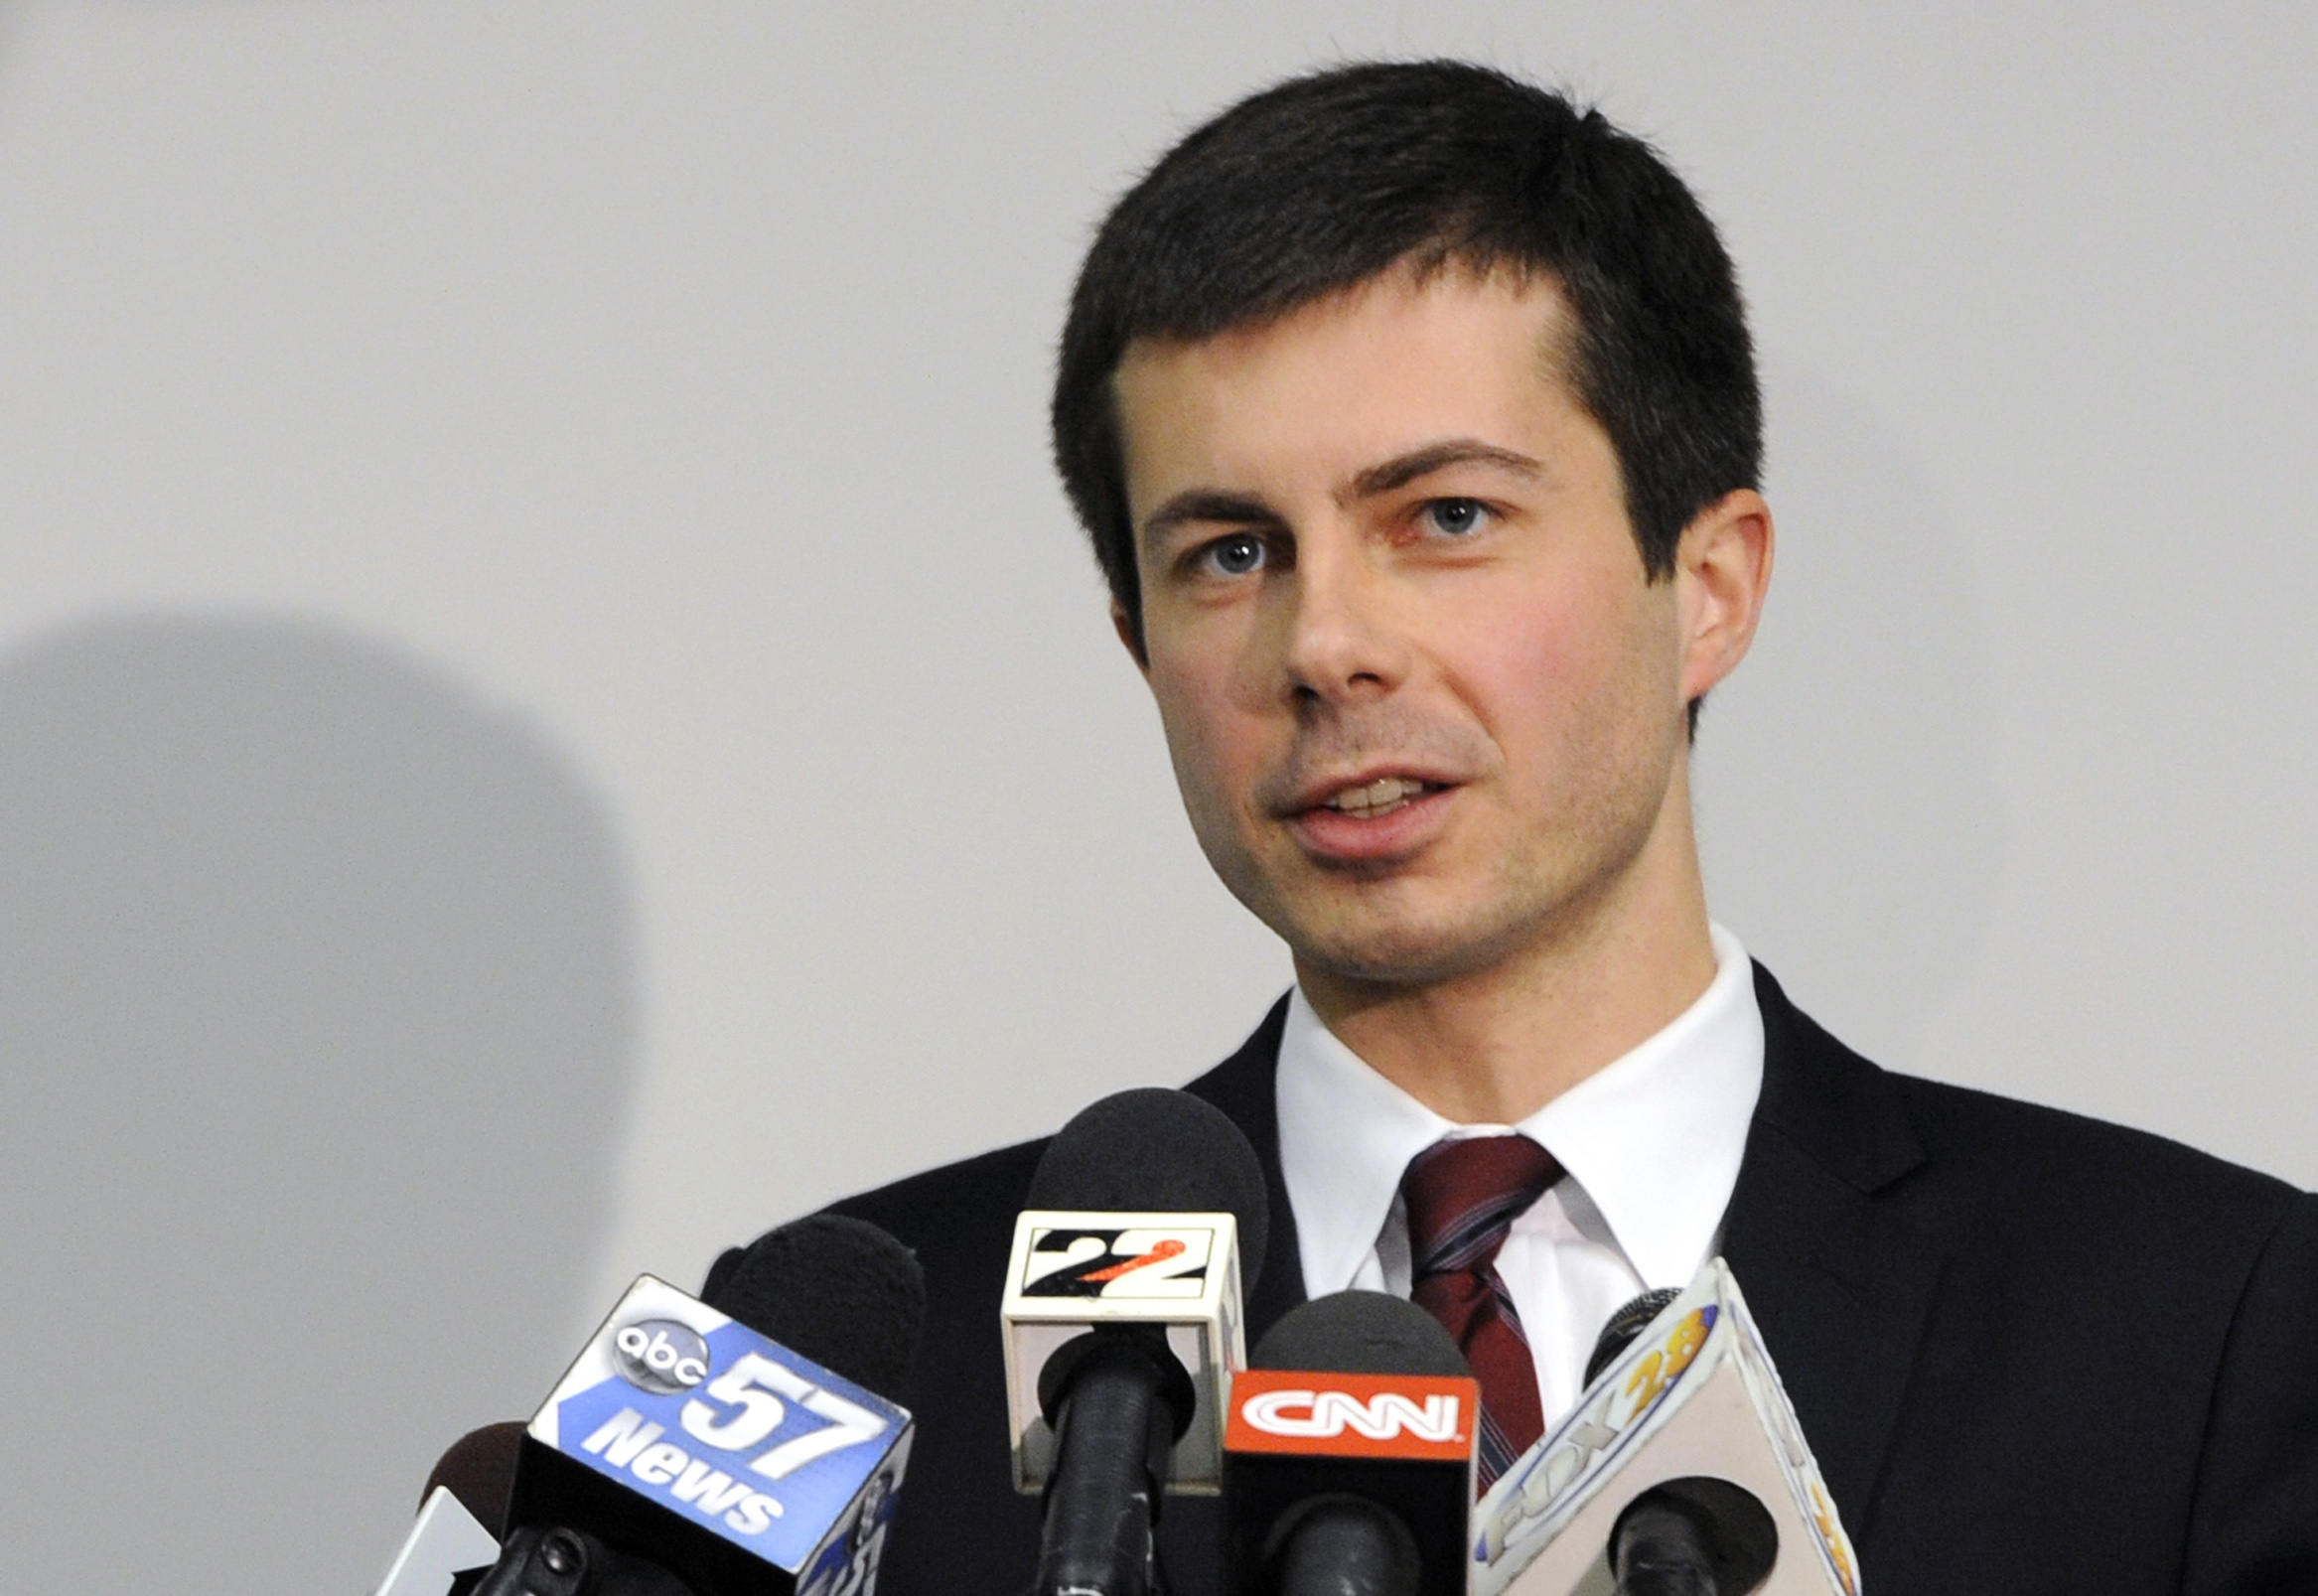 South Bend Mayor Pete Buttigieg came out as gay in an essay published on Tuesday, June 16, 2015,  in the South Bend Tribune. (Joe Raymond&mdash;FILE/AP)